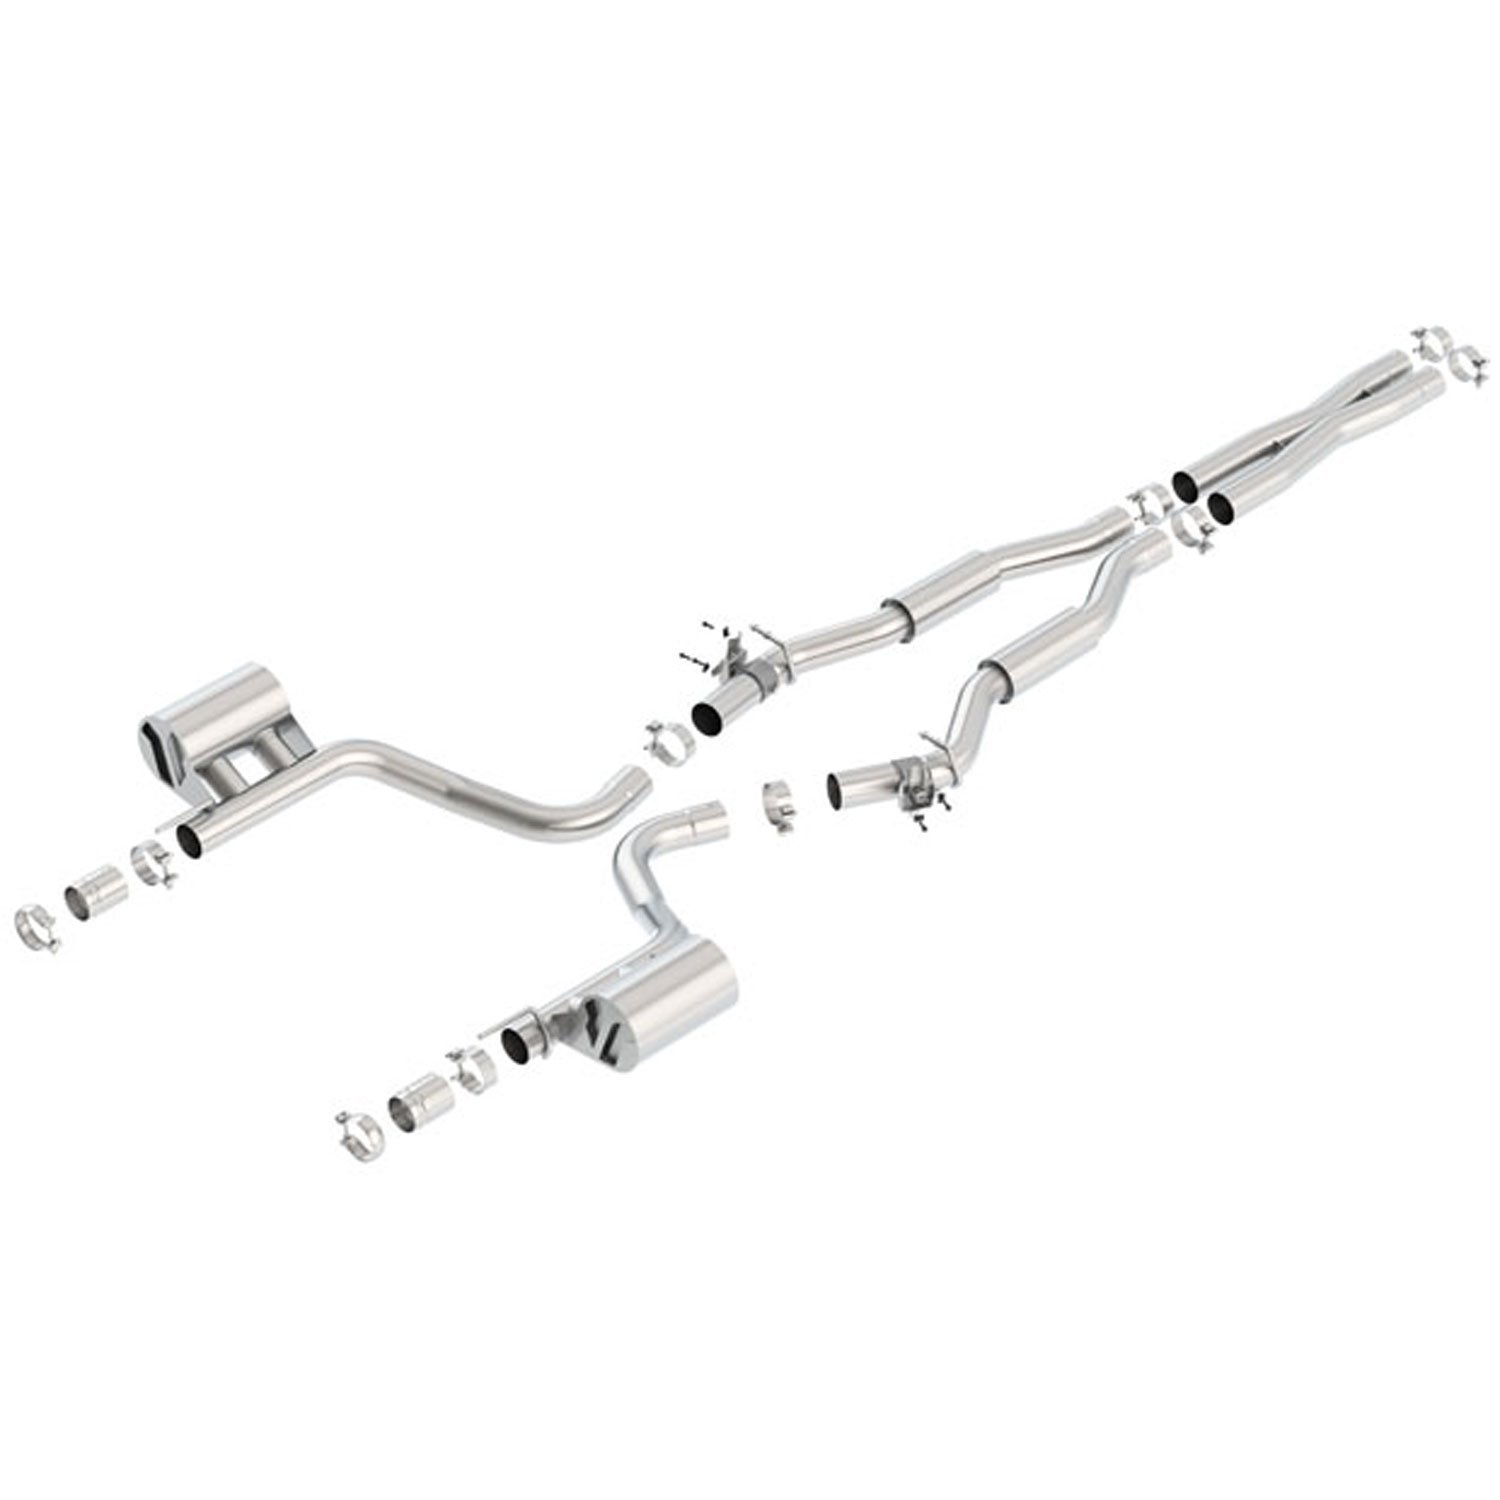 Cat-Back Exhaust System 2015-18 Challenger Hellcat 6.2L